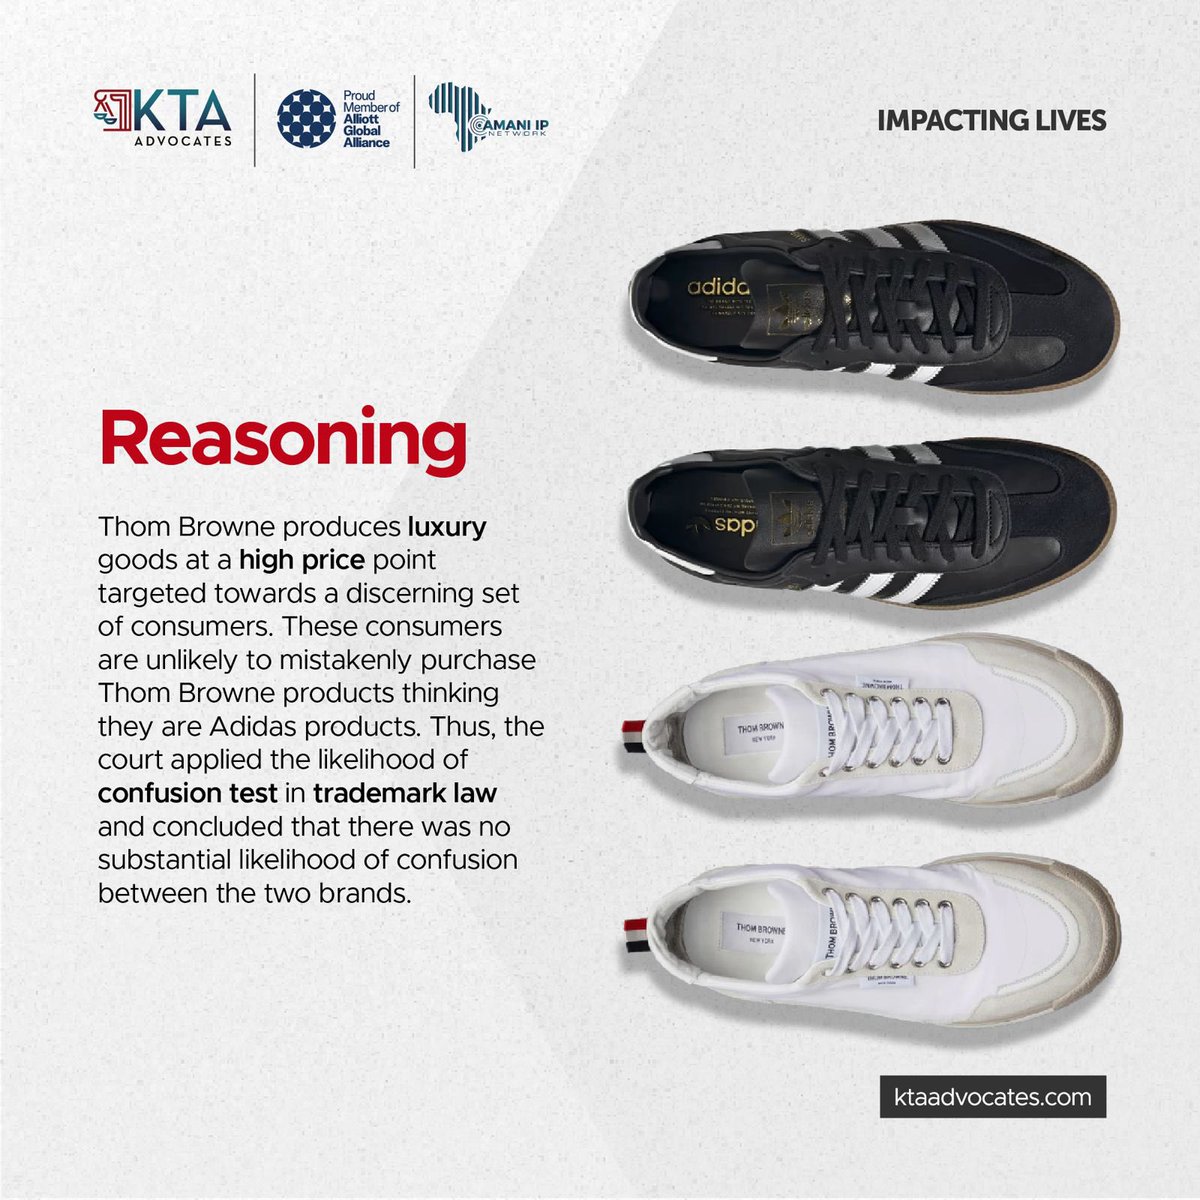 Adidas recently encountered a stumbling block in a trademark infringement case against Thom Browne. The takeaway? Before pursuing legal action, it’s crucial to grasp the intricacies of the likelihood of confusion test in trademark law. #KTAat15 #IntellectualProperty